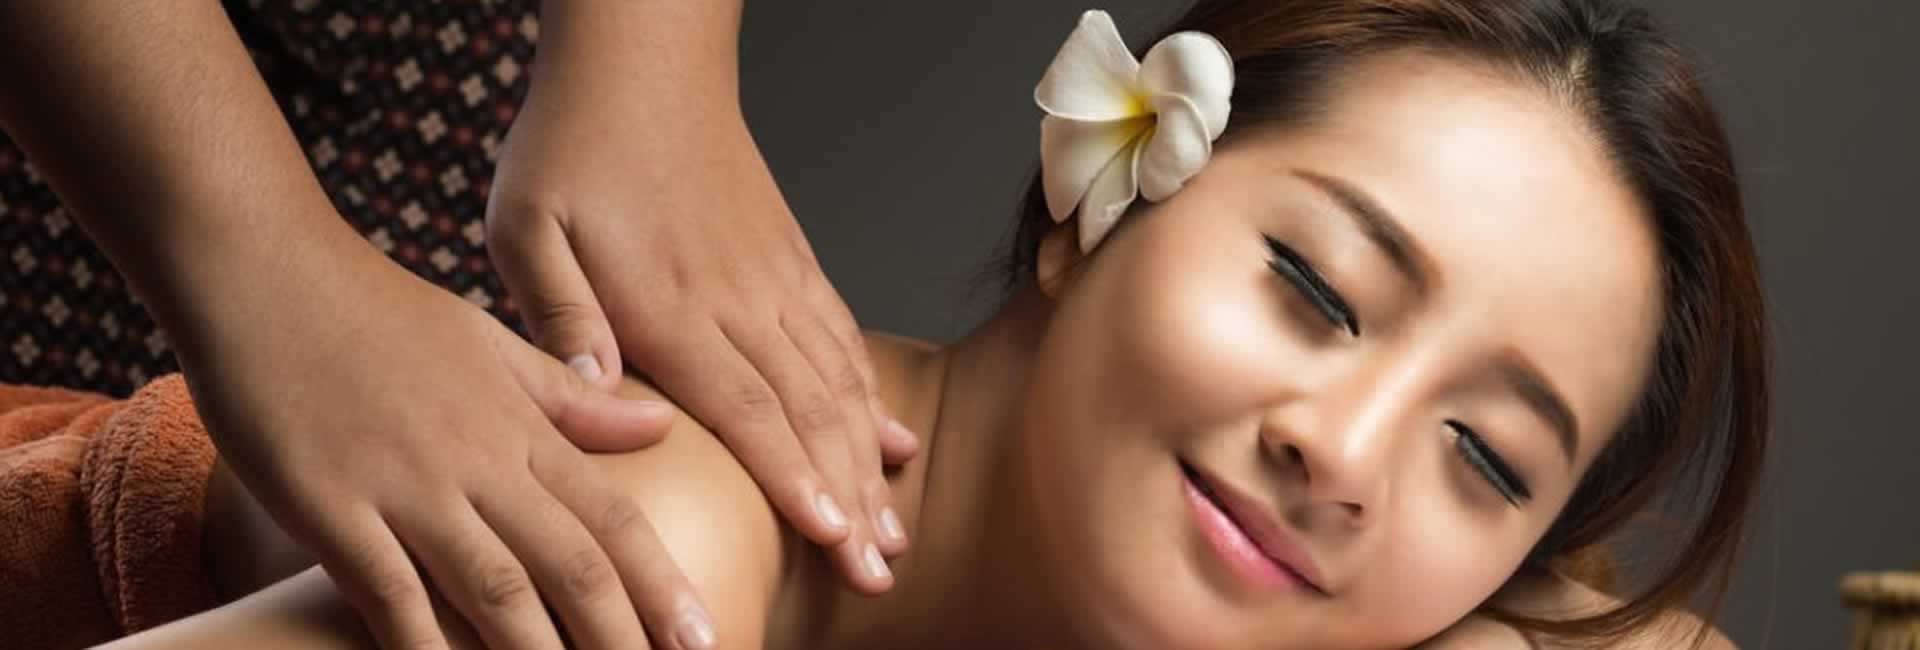 Tips for finding a good massage therapist in Manchester